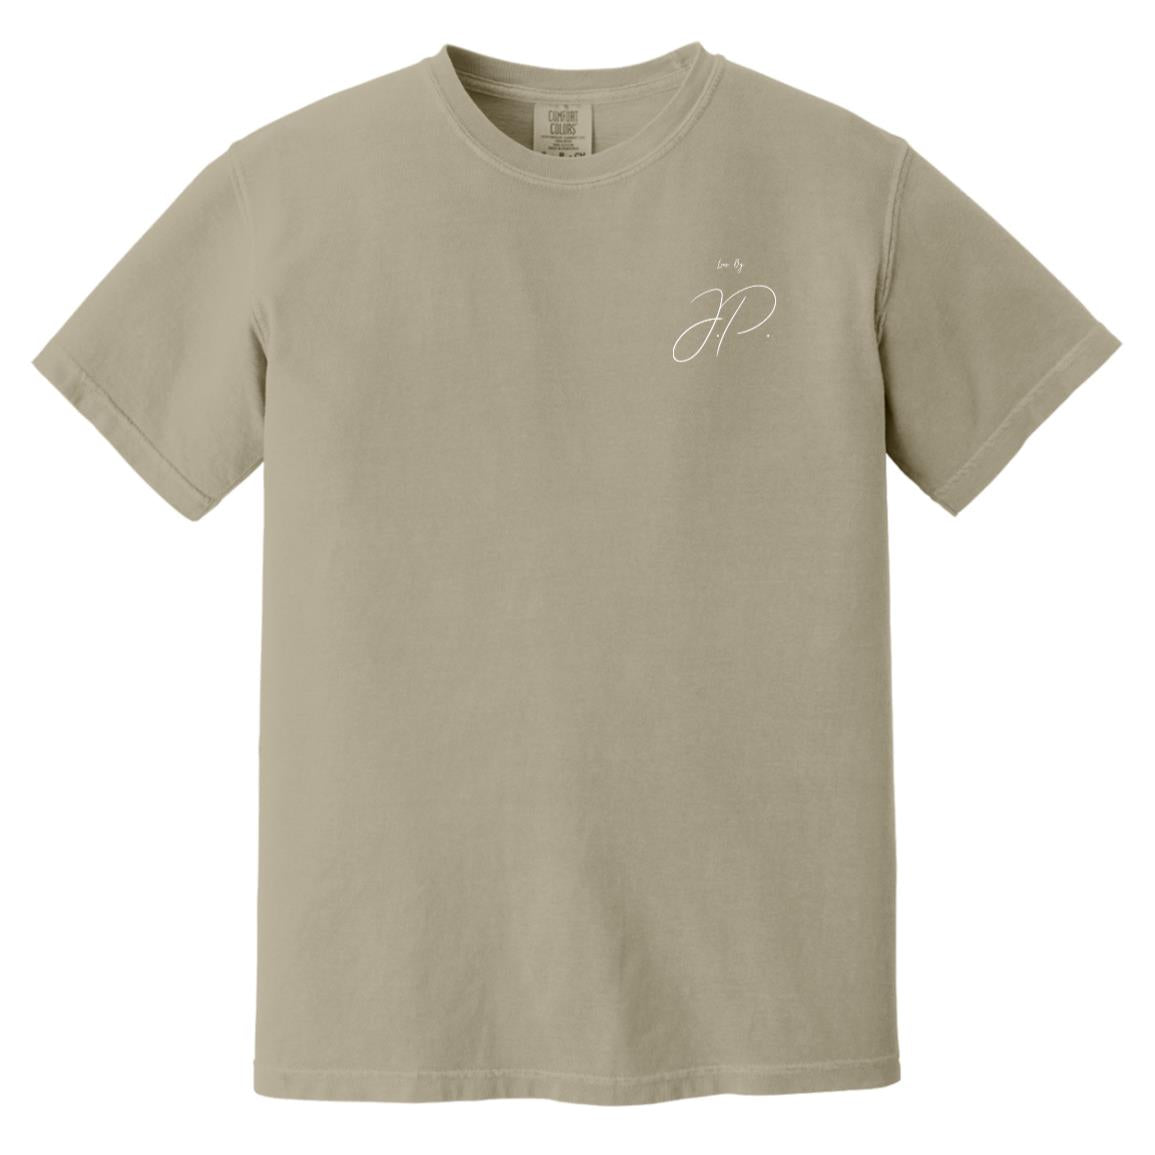 Lux. Heavyweight T-Shirt - Sandstone - Colors Edition